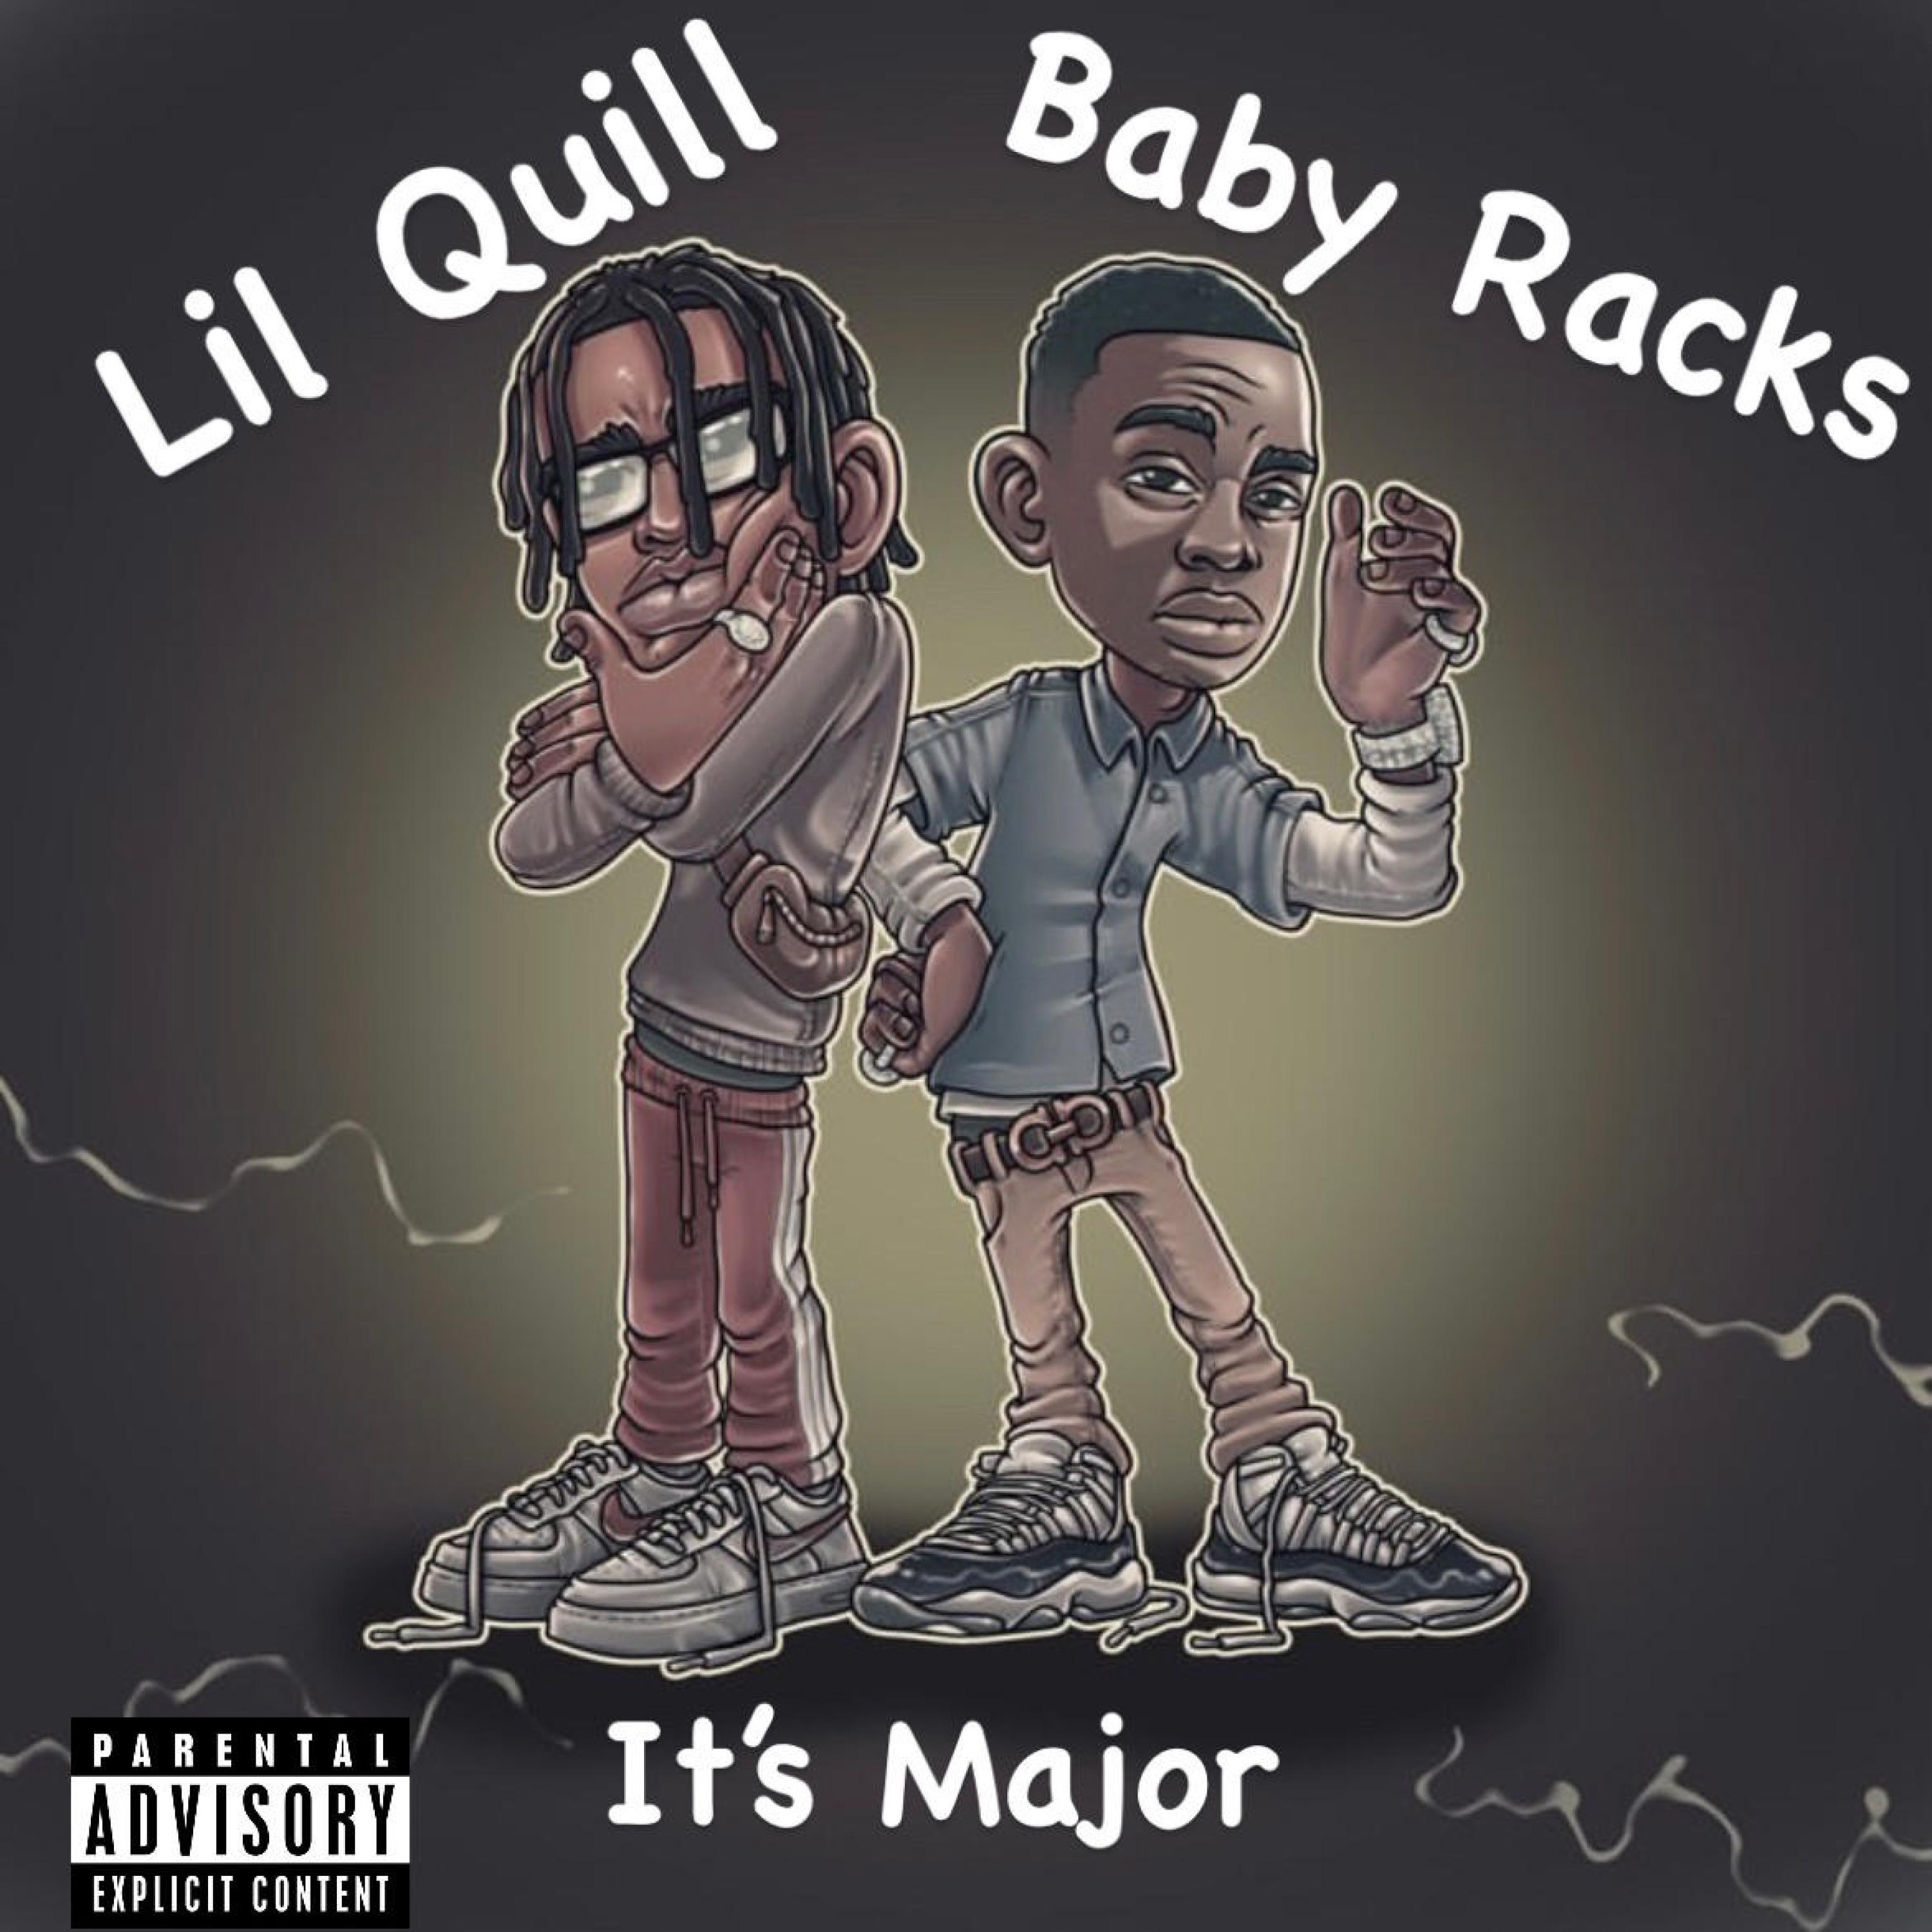 Baby Racks - It's Major (feat. Lil Quill)